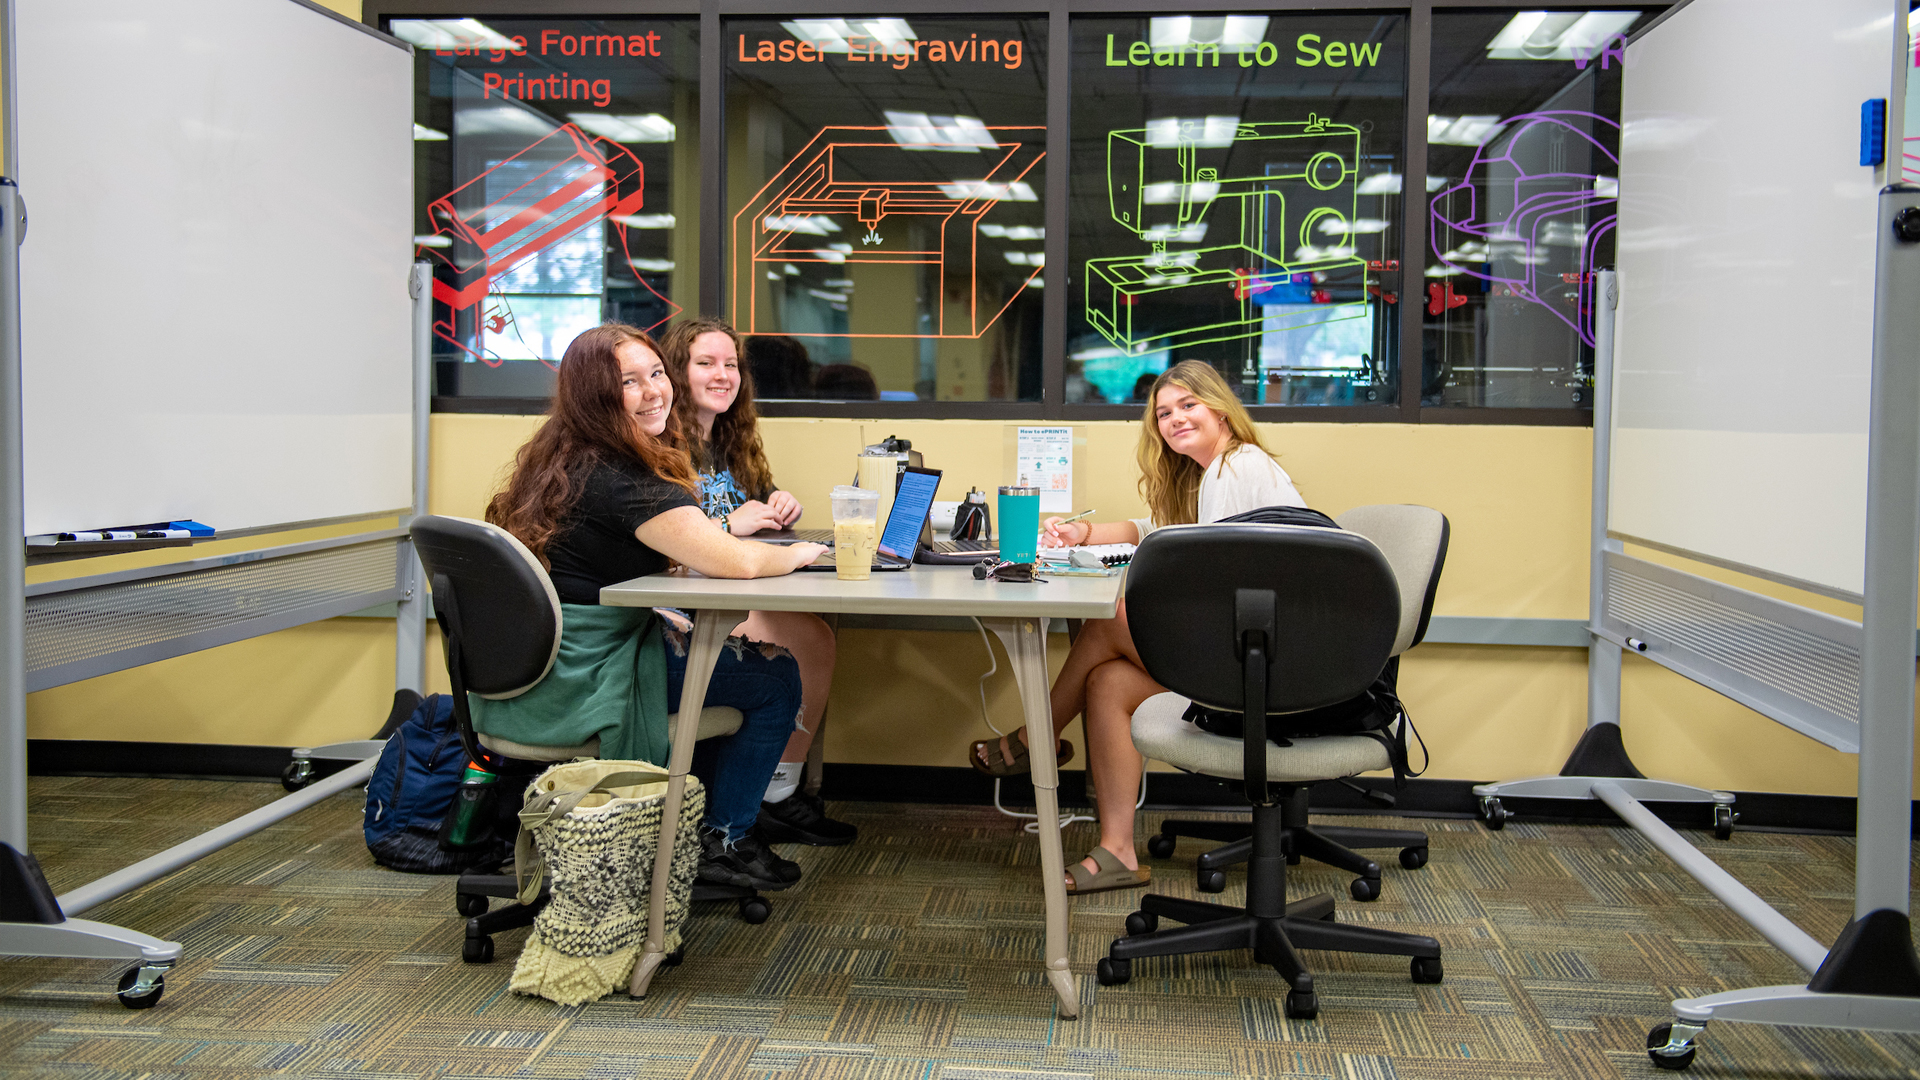 Three students studying at a desk, alongside whiteboards, at the MakerSpace.